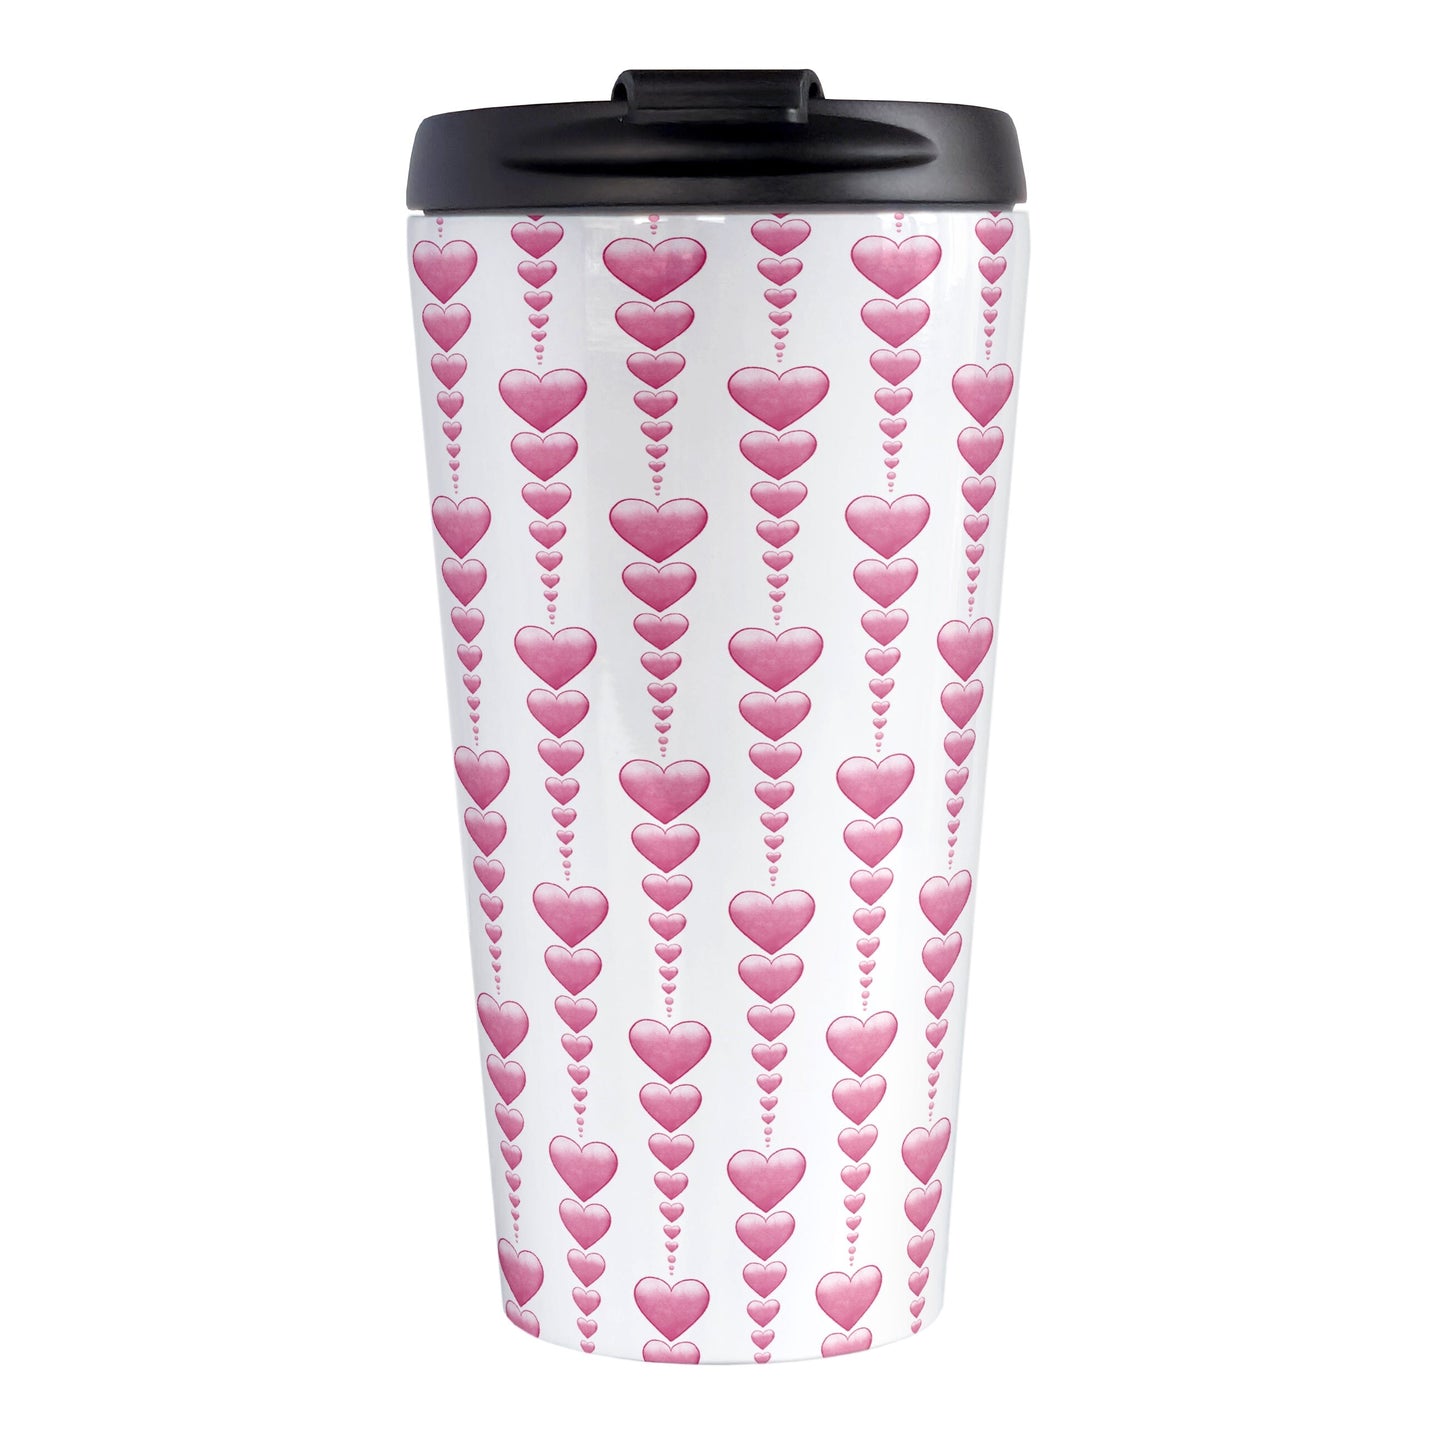 Heart Strings Travel Mug at Amy's Coffee Mugs. A stainless steel insulated travel mug designed with strings of pink hearts descending in size in a pattern that wraps around the mug.  